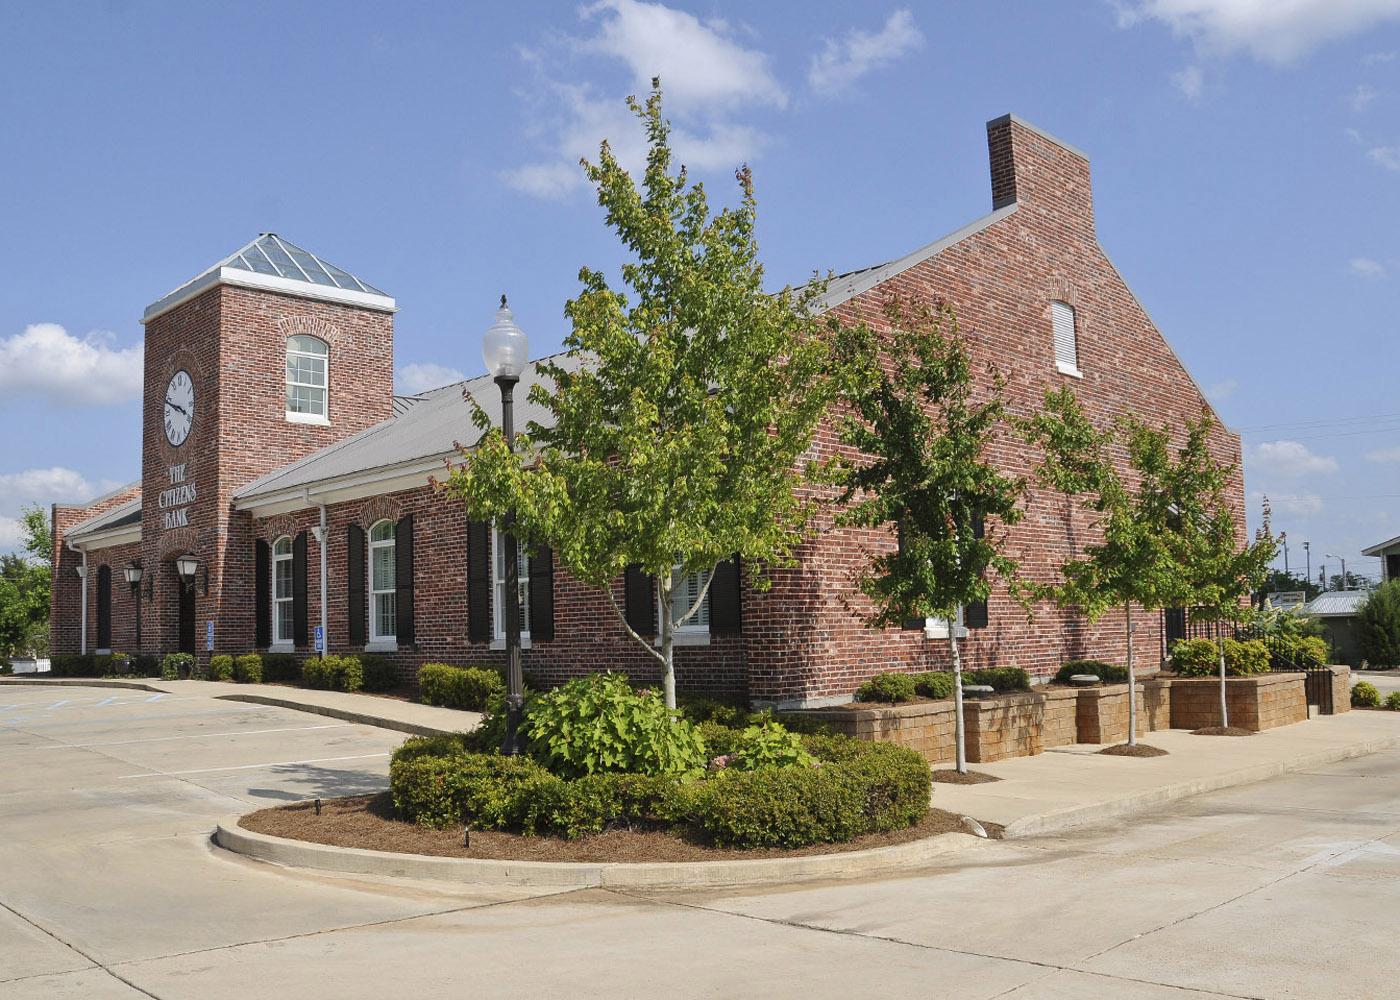 Trees planted at the east and west ends of a building, such as those at The Citizens Bank of Philadelphia branch in Starkville, provide shade and reduce energy use.